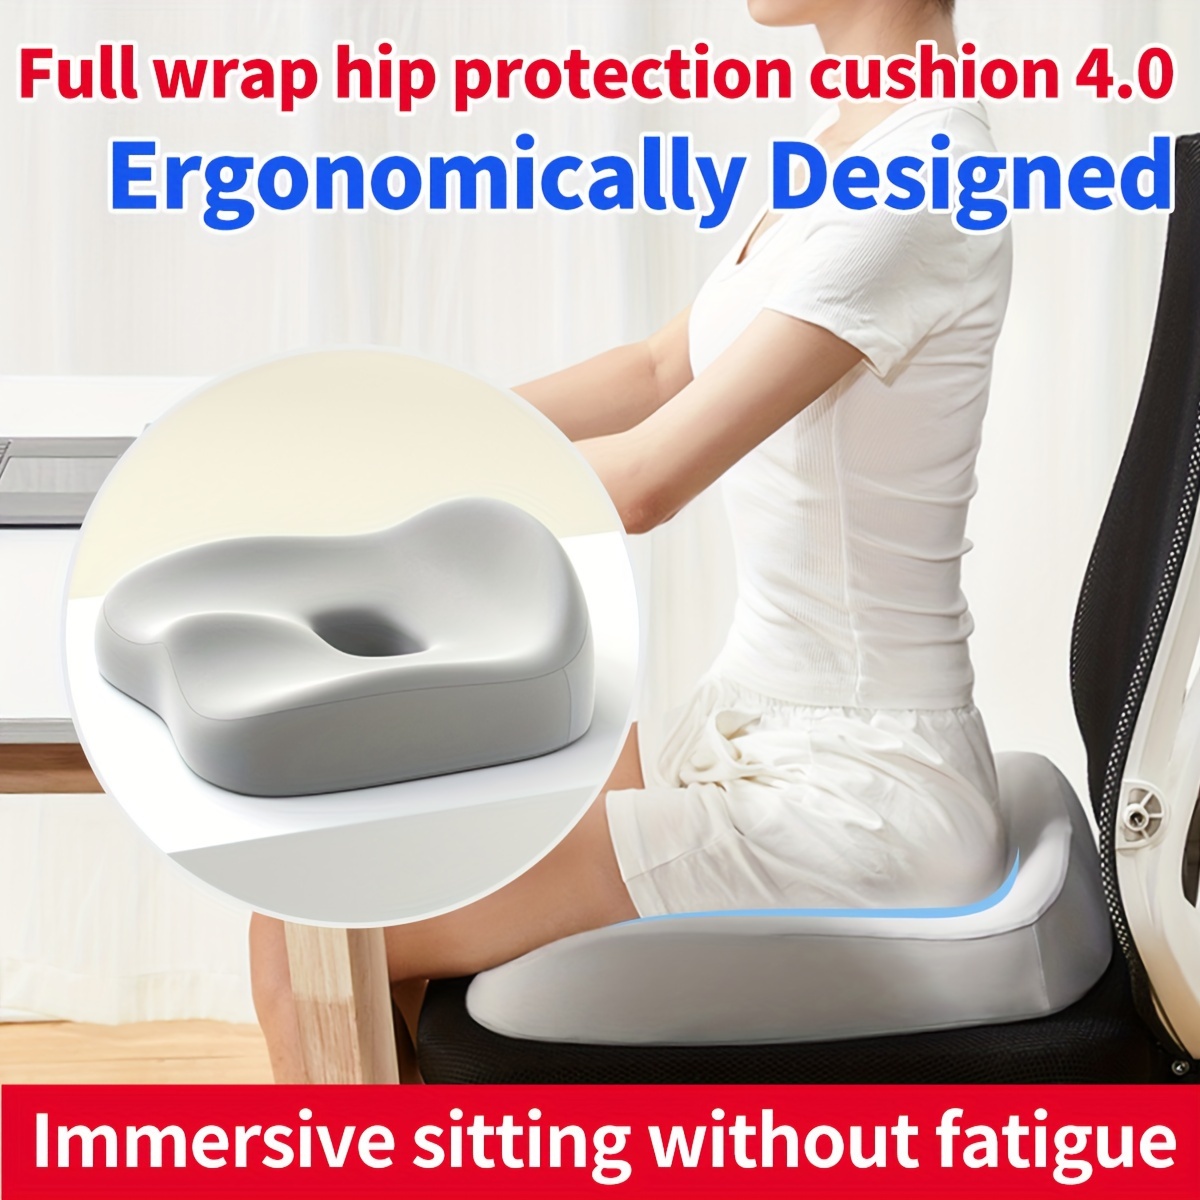 Coccyx Pillow & Coccyx Cushion Seat for Relief from Sciatica & Hip